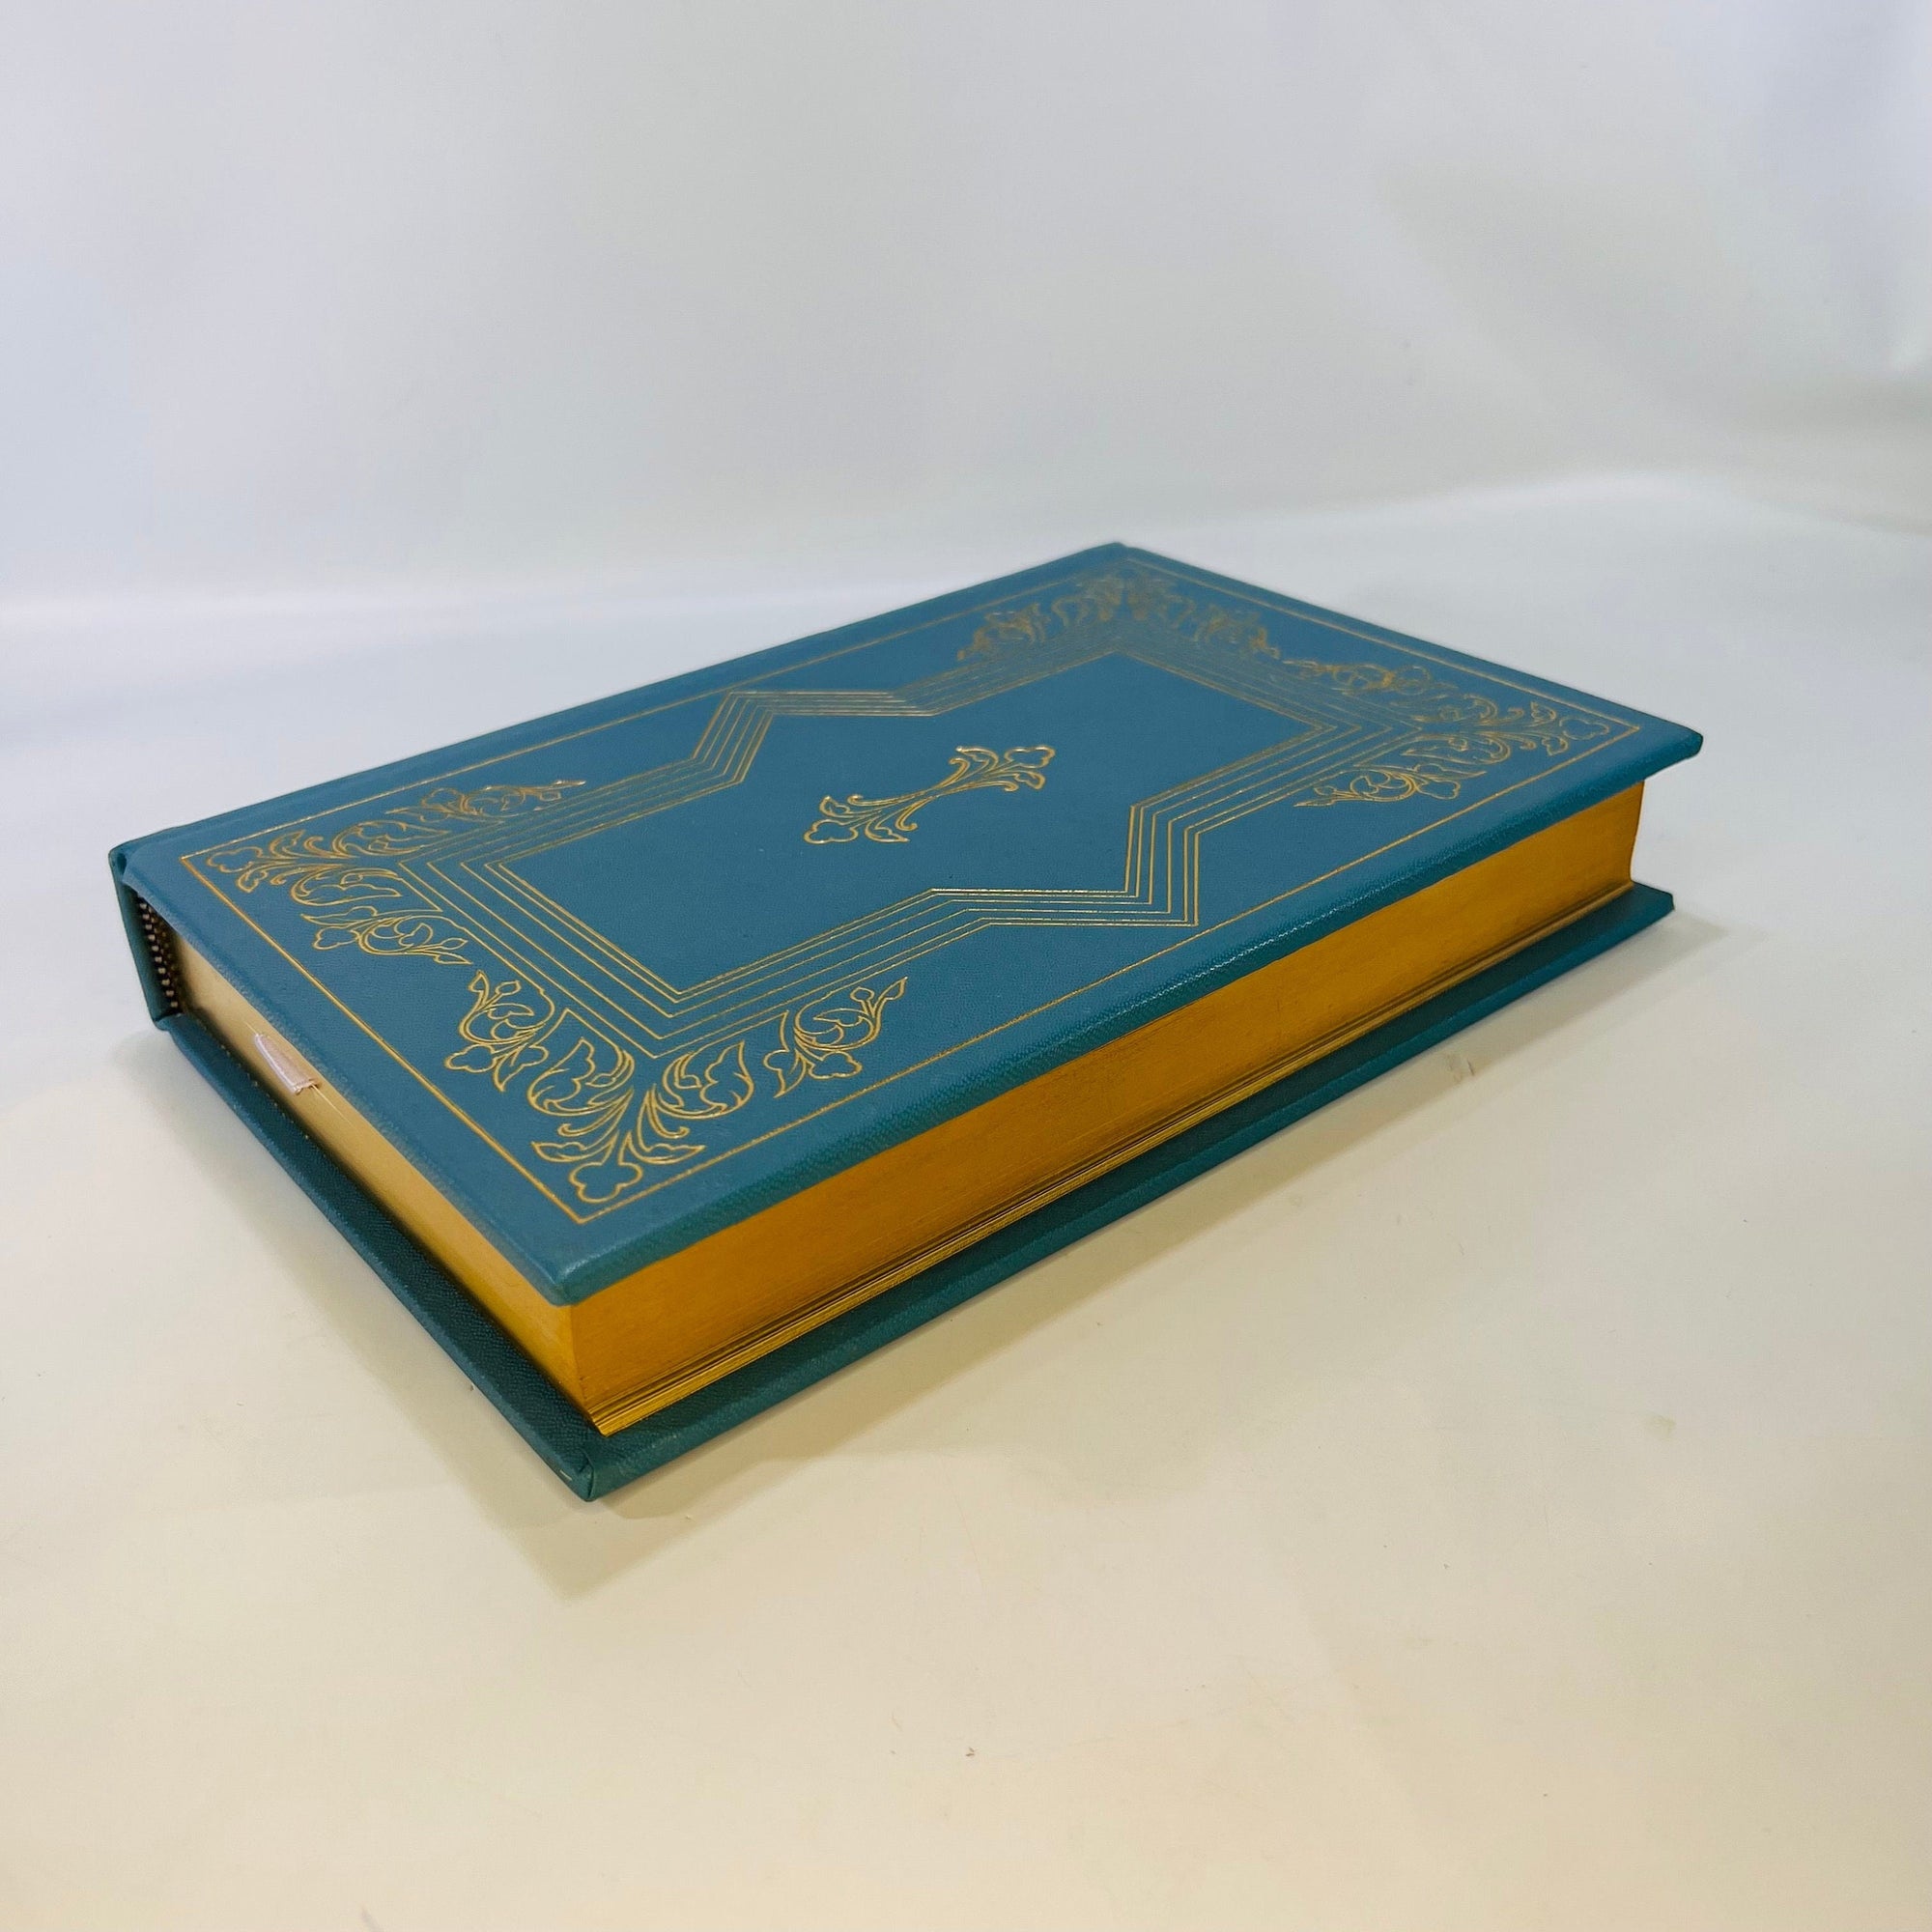 Madame Bovary by Gustave Flaubert 1975 Easton Press part of the 100 Greatest Books